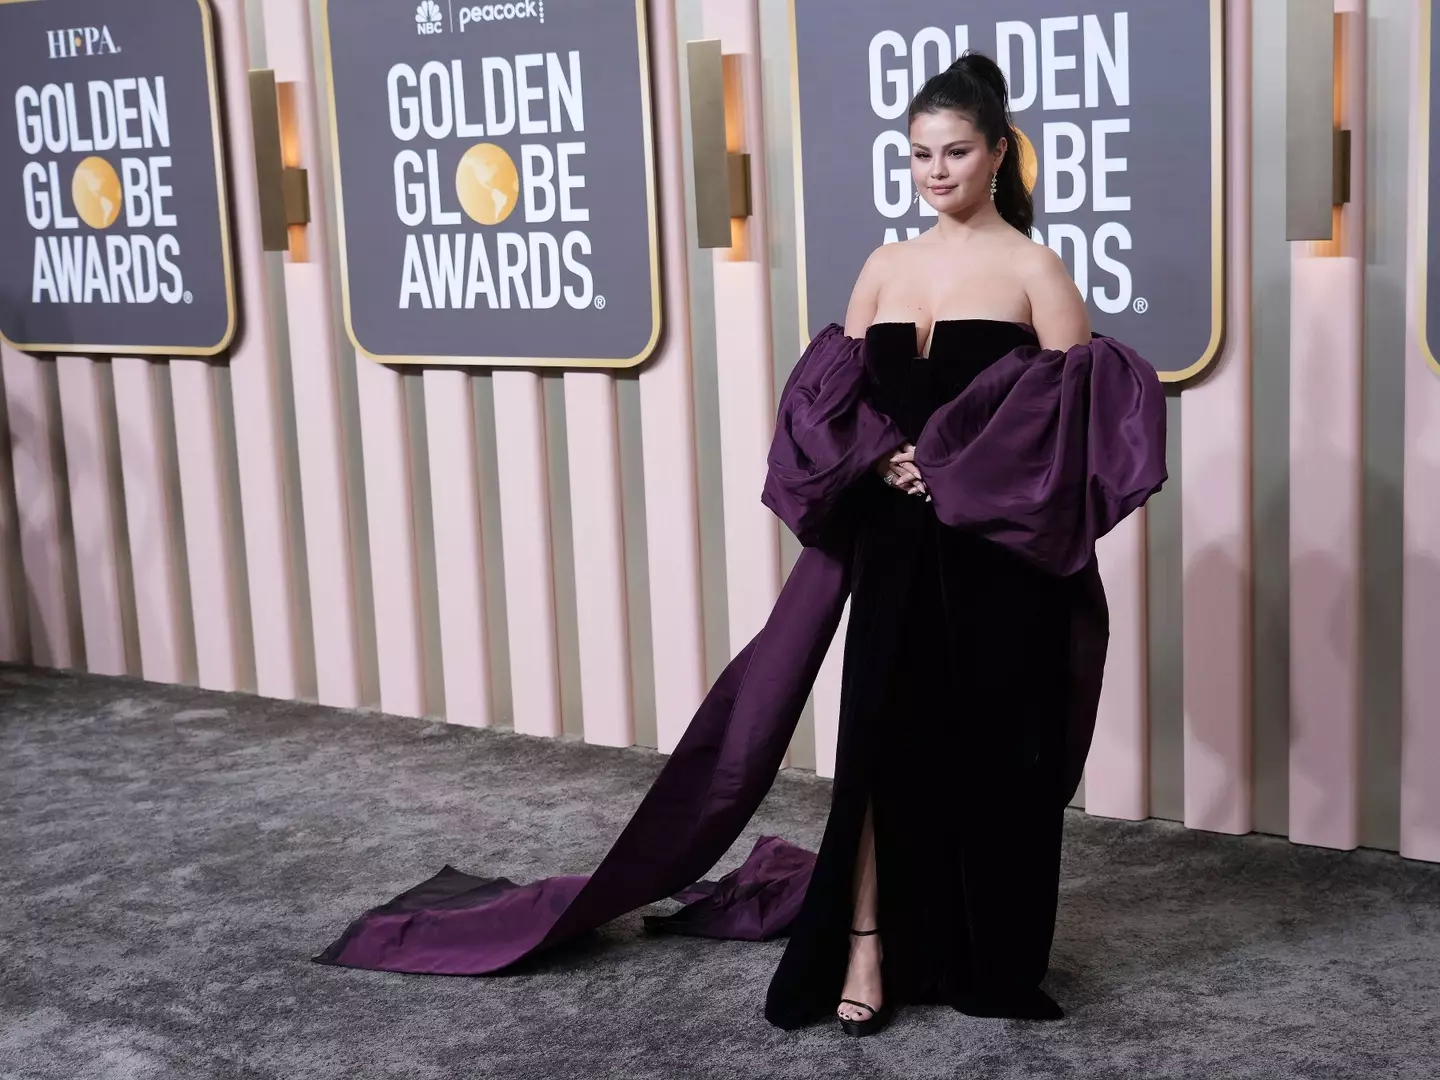 Trolls have attacked Selena Gomez following her public appearance at the Golden Globes.